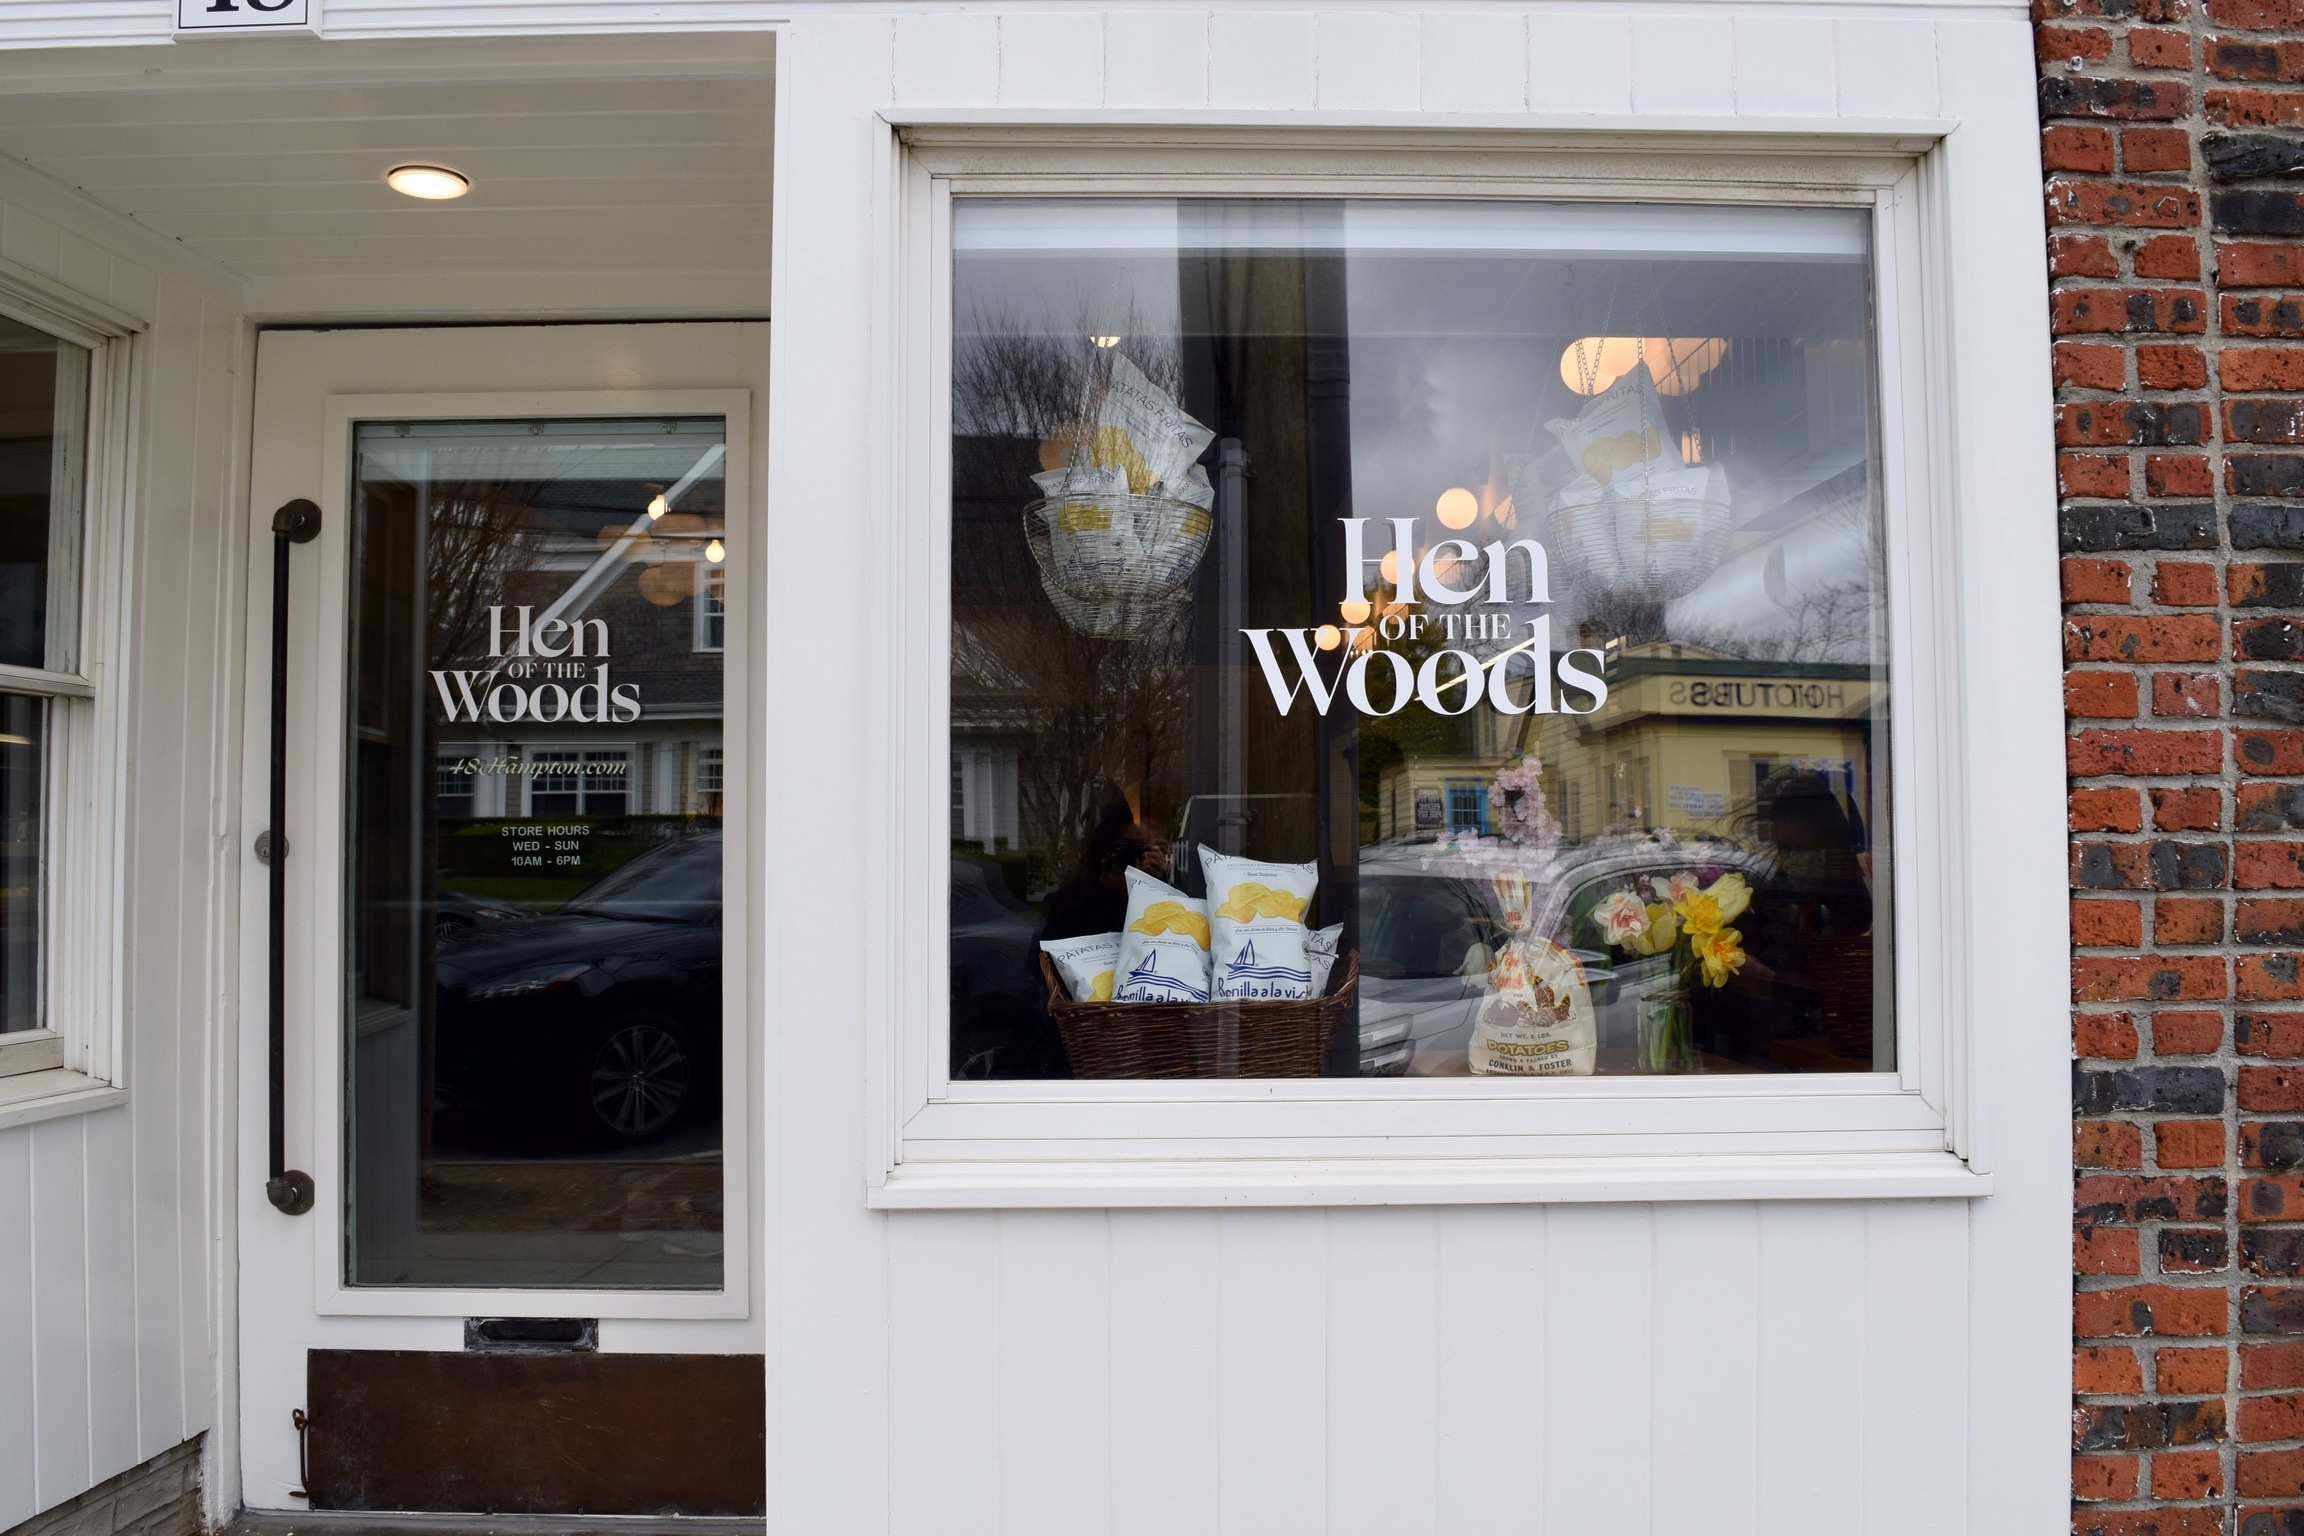 Hen of the Woods market opens this week in Southampton.